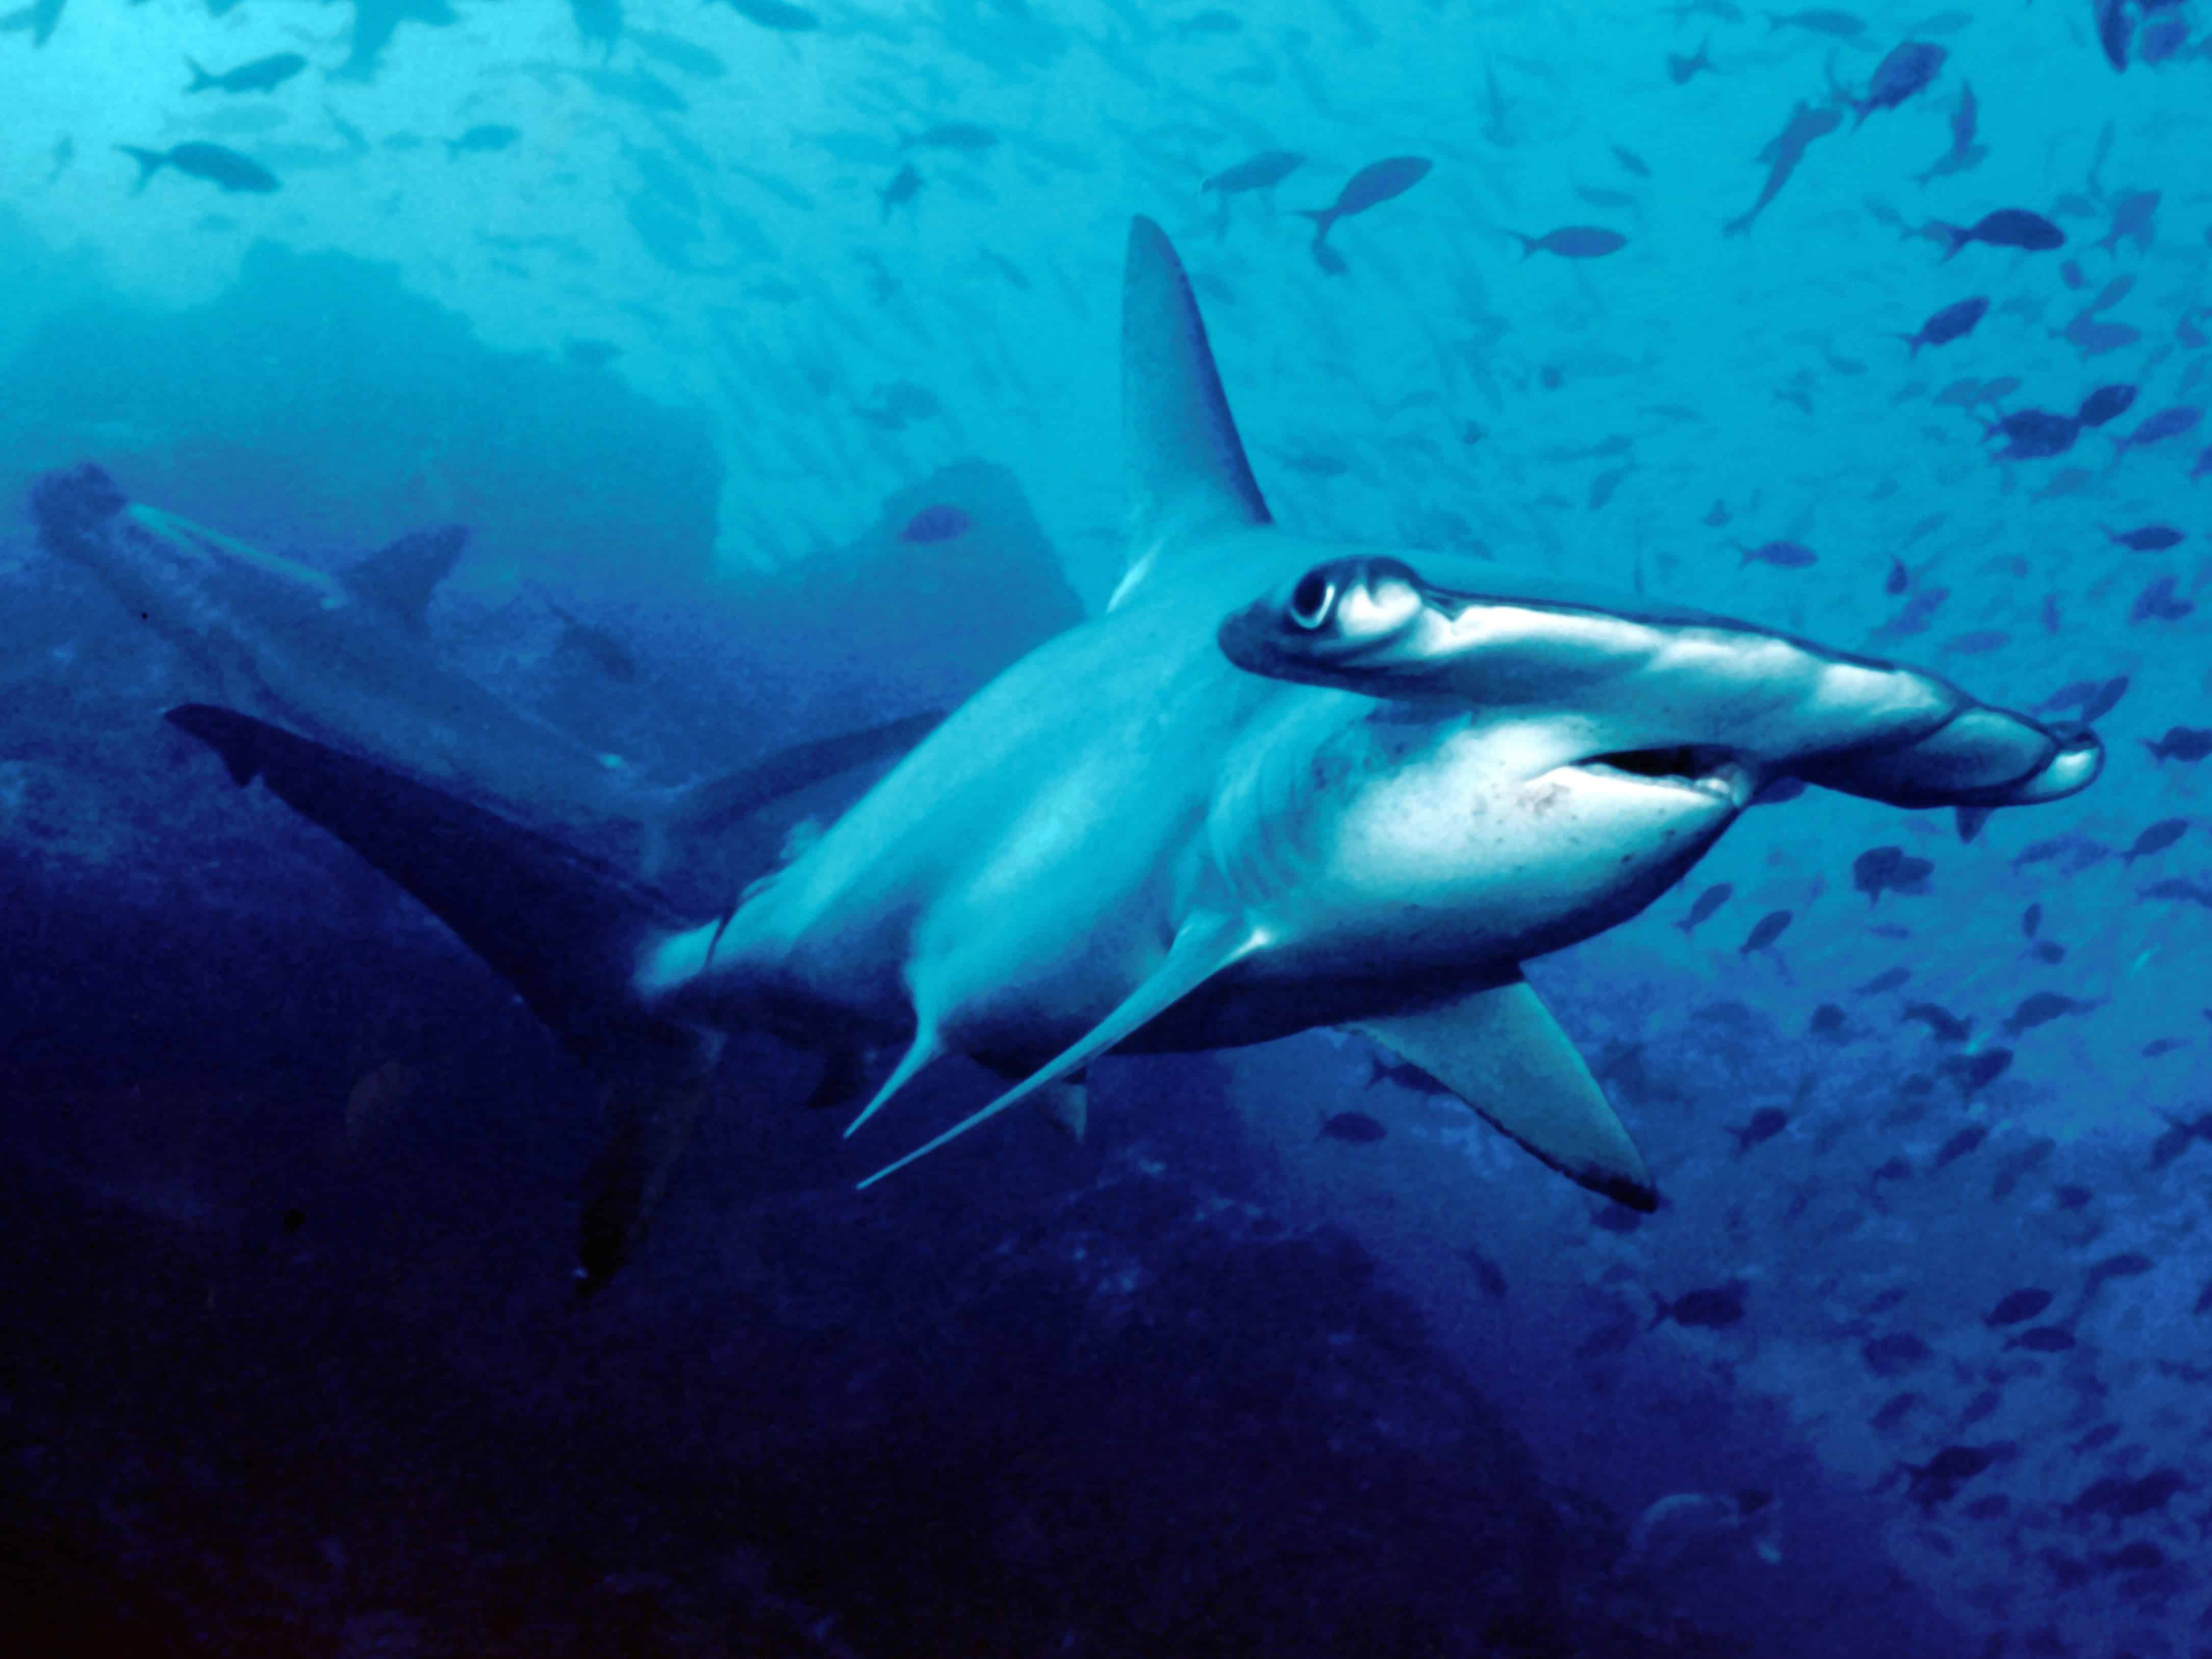 CITES protects scalloped hammerheads off Costa Rica's Cocos Island.